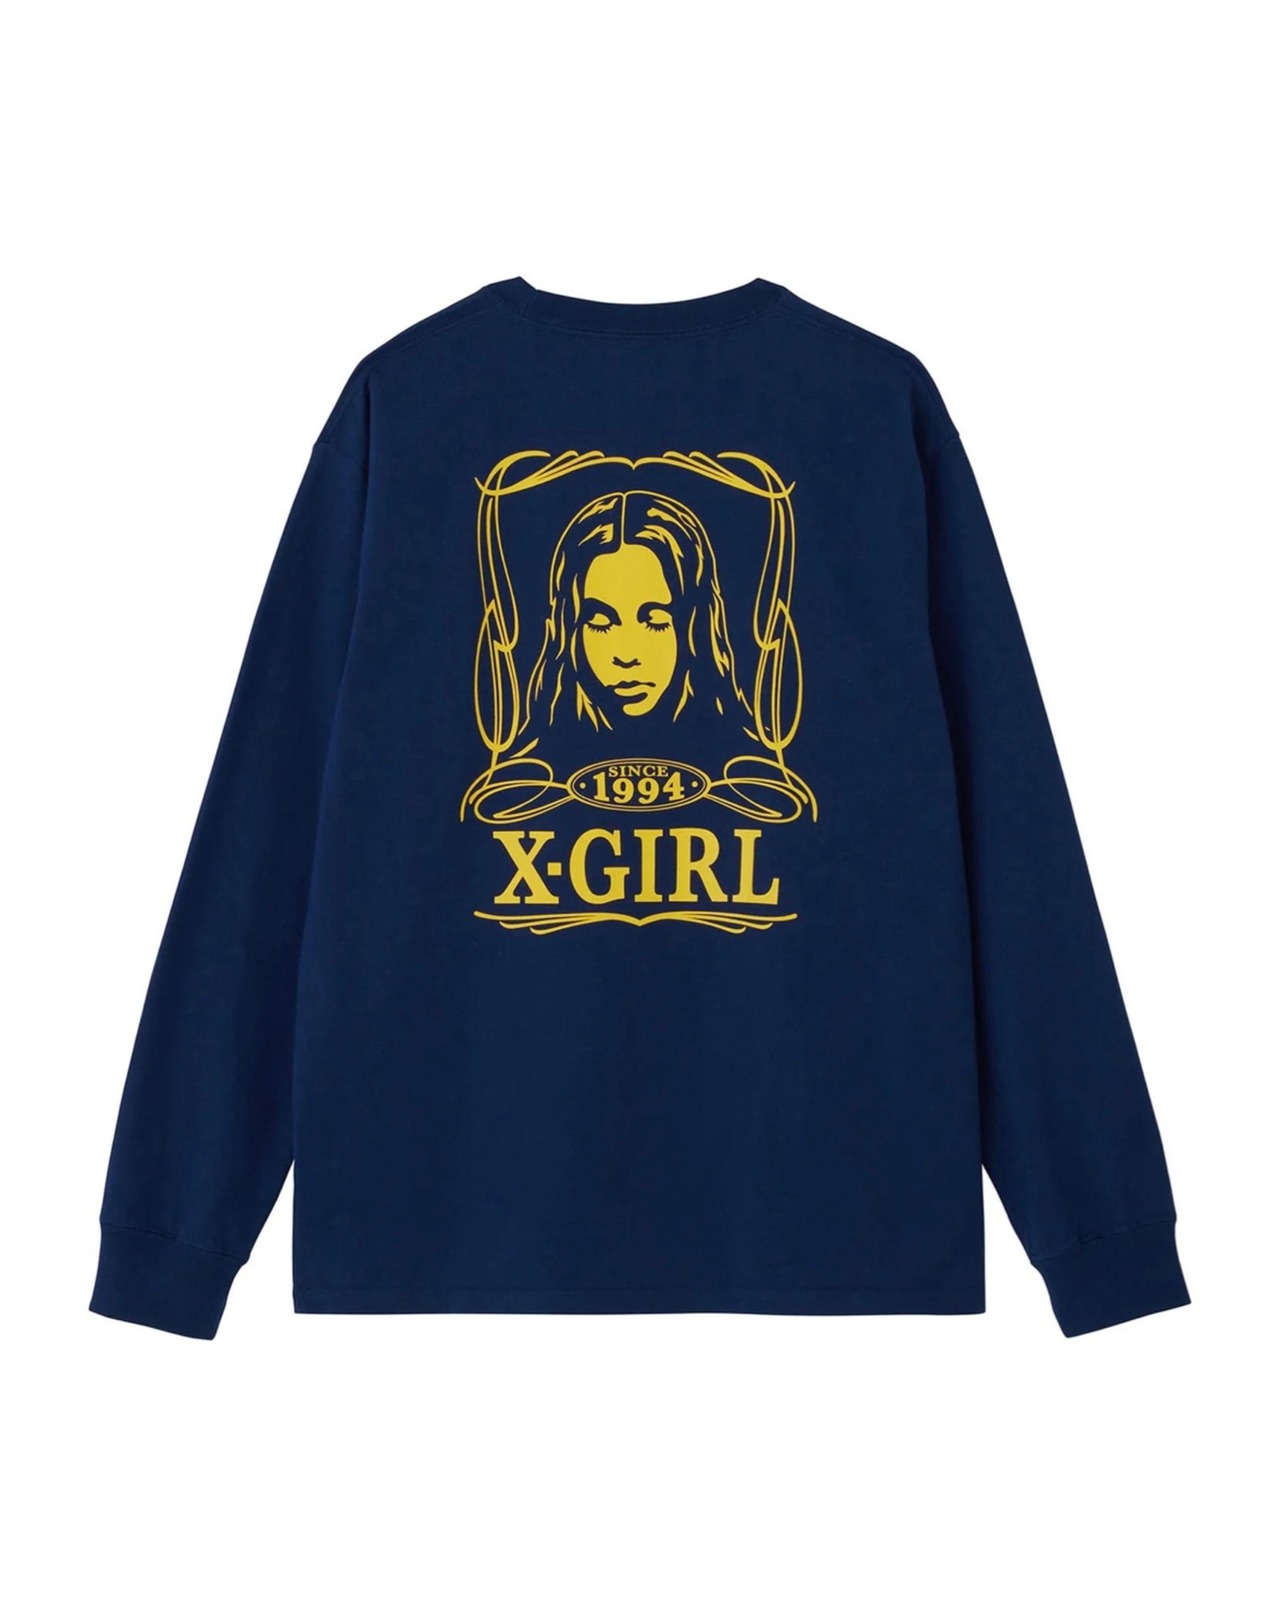 【X-girl】PINSTRIPE FACE L/S TEE 【エックスガール】